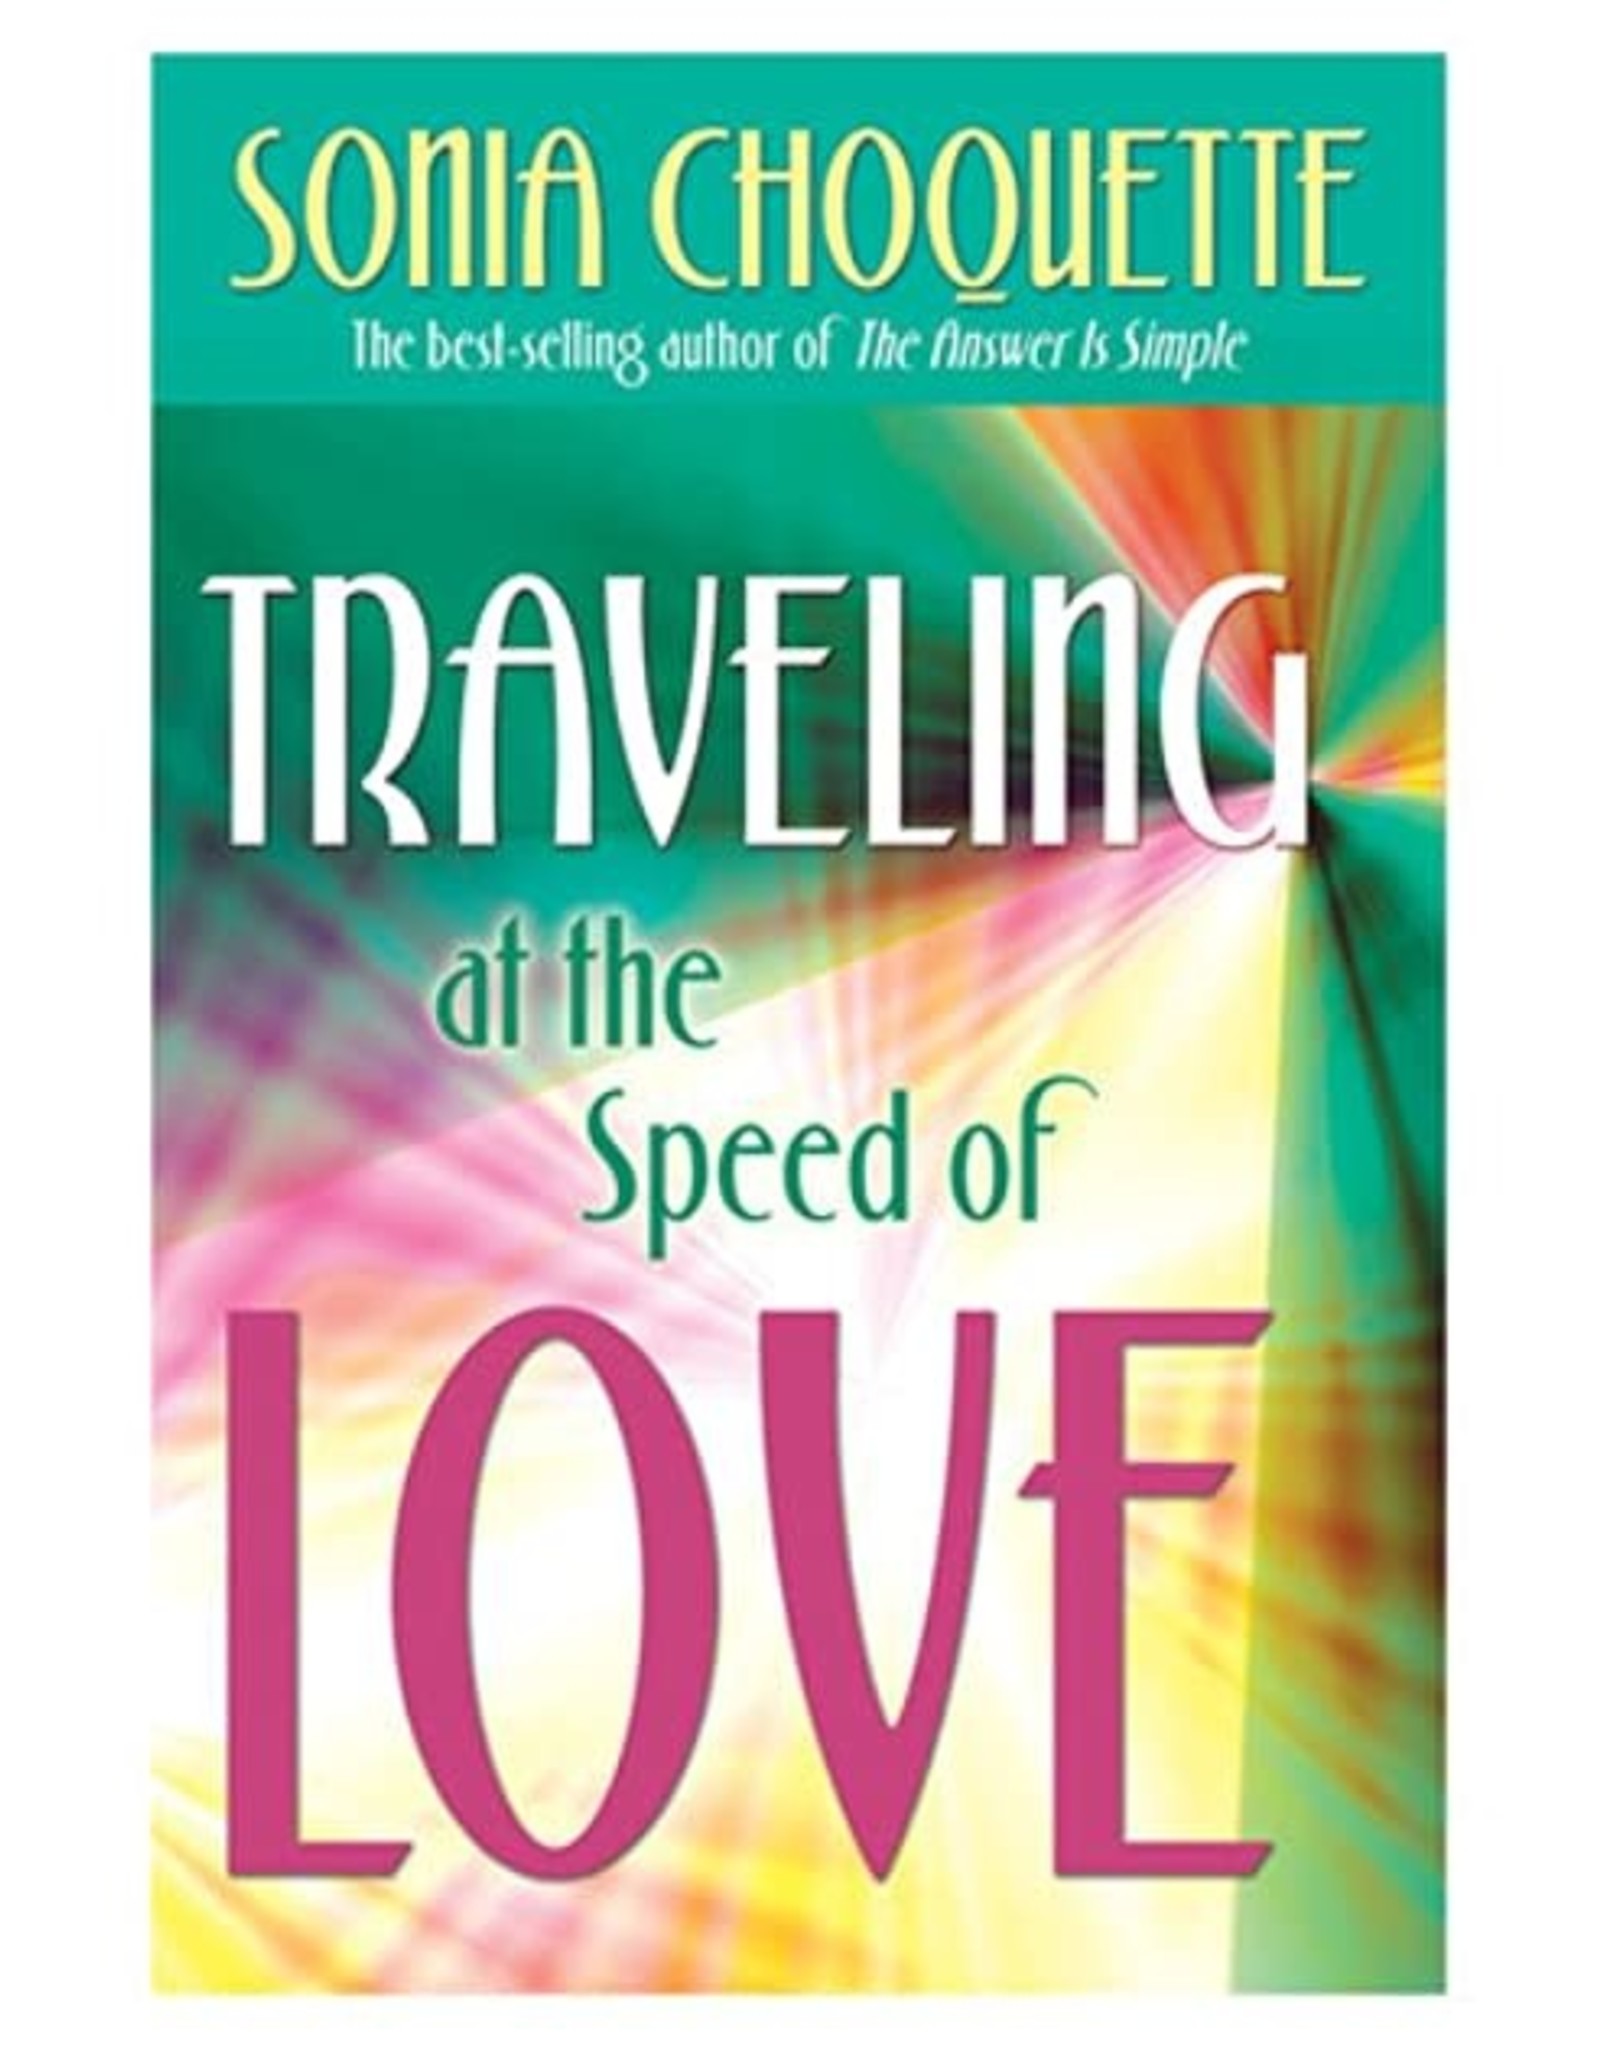 Sonia Choquette Travelling at the Speed of Love by Sonia Choquette